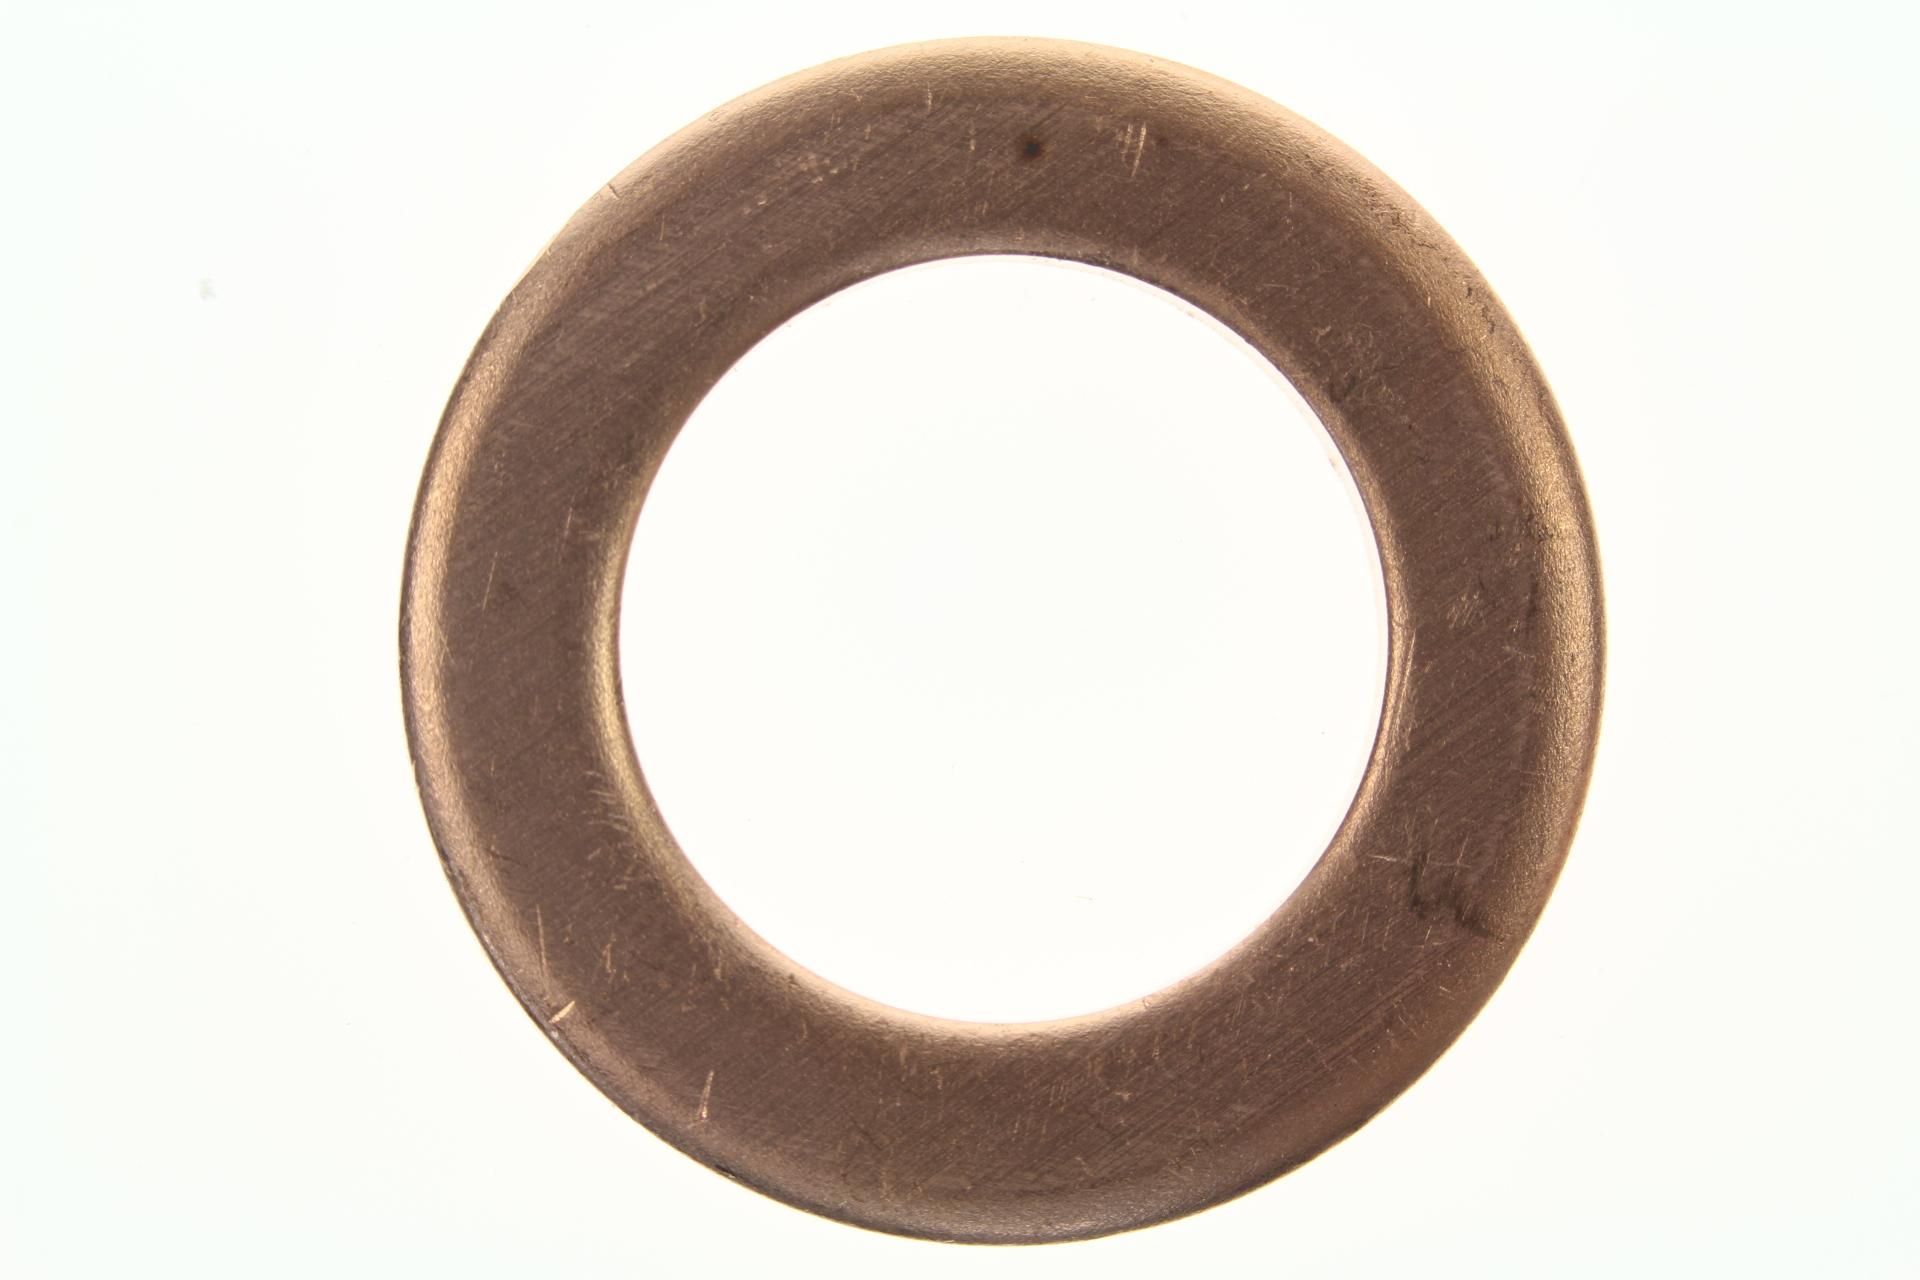 43D-E5561-00-00 WASHER